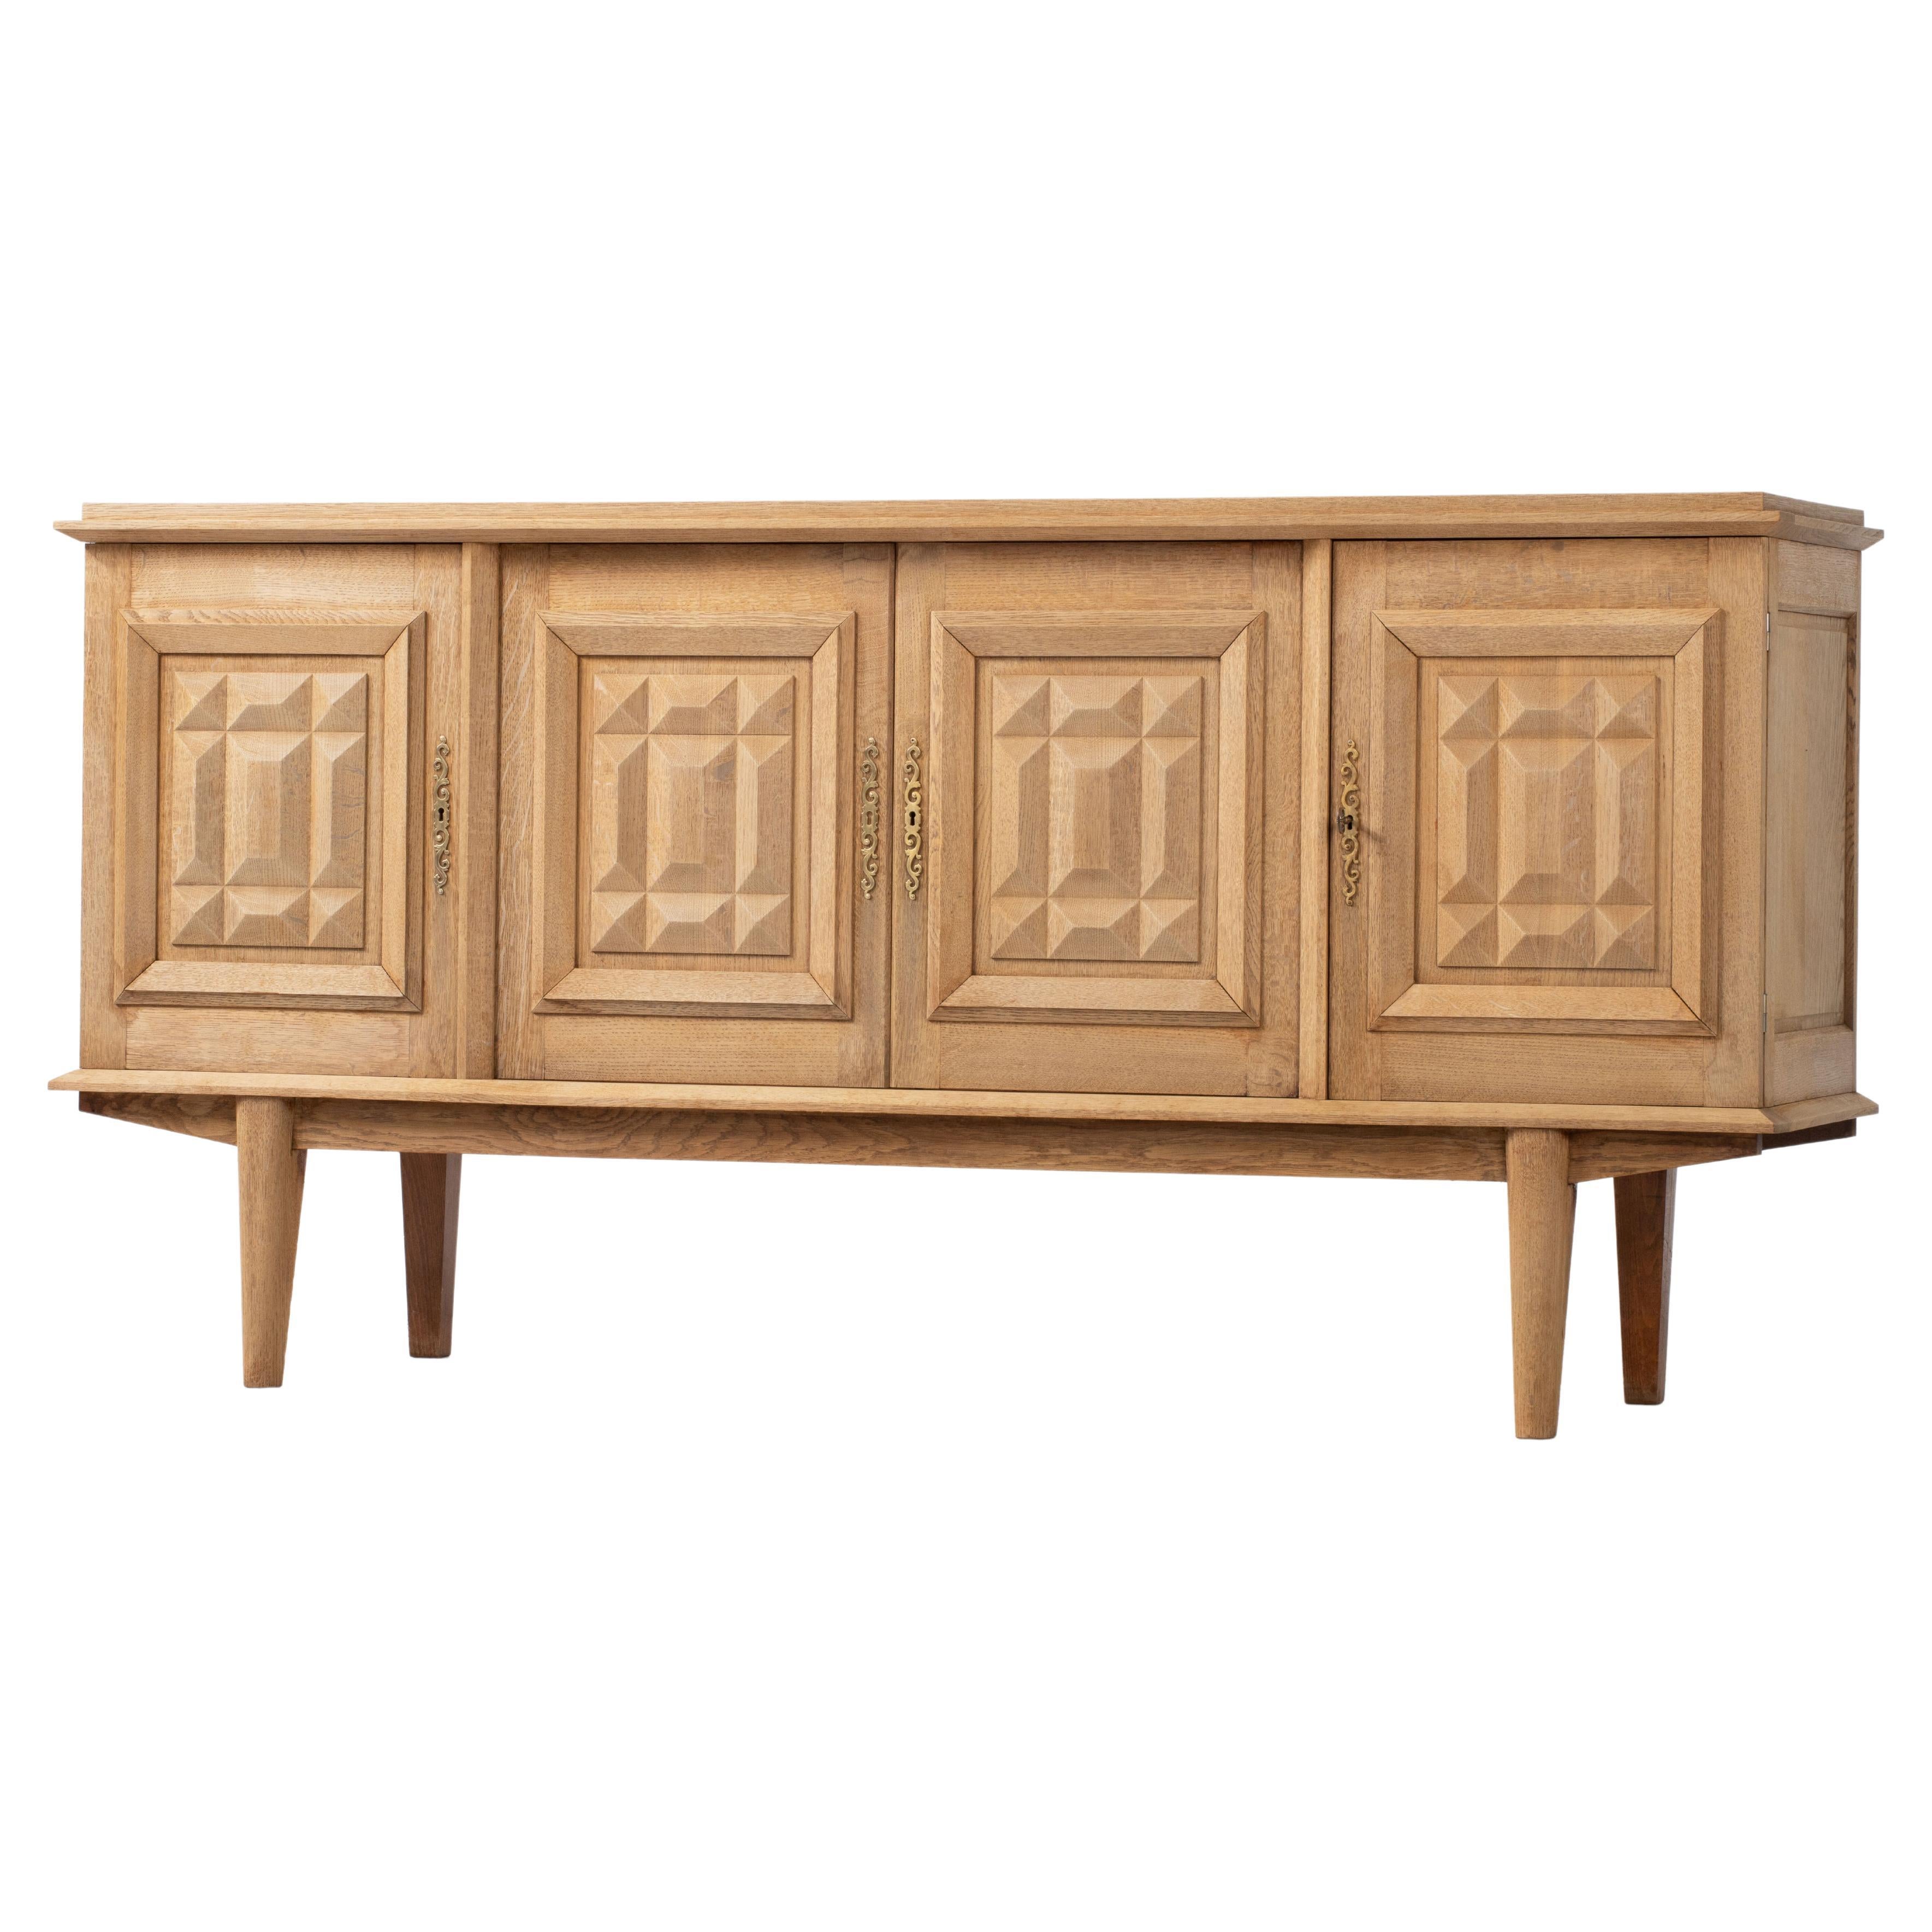 Bleached Solid Oak Credenza with Graphic Details, France, 1940s For Sale